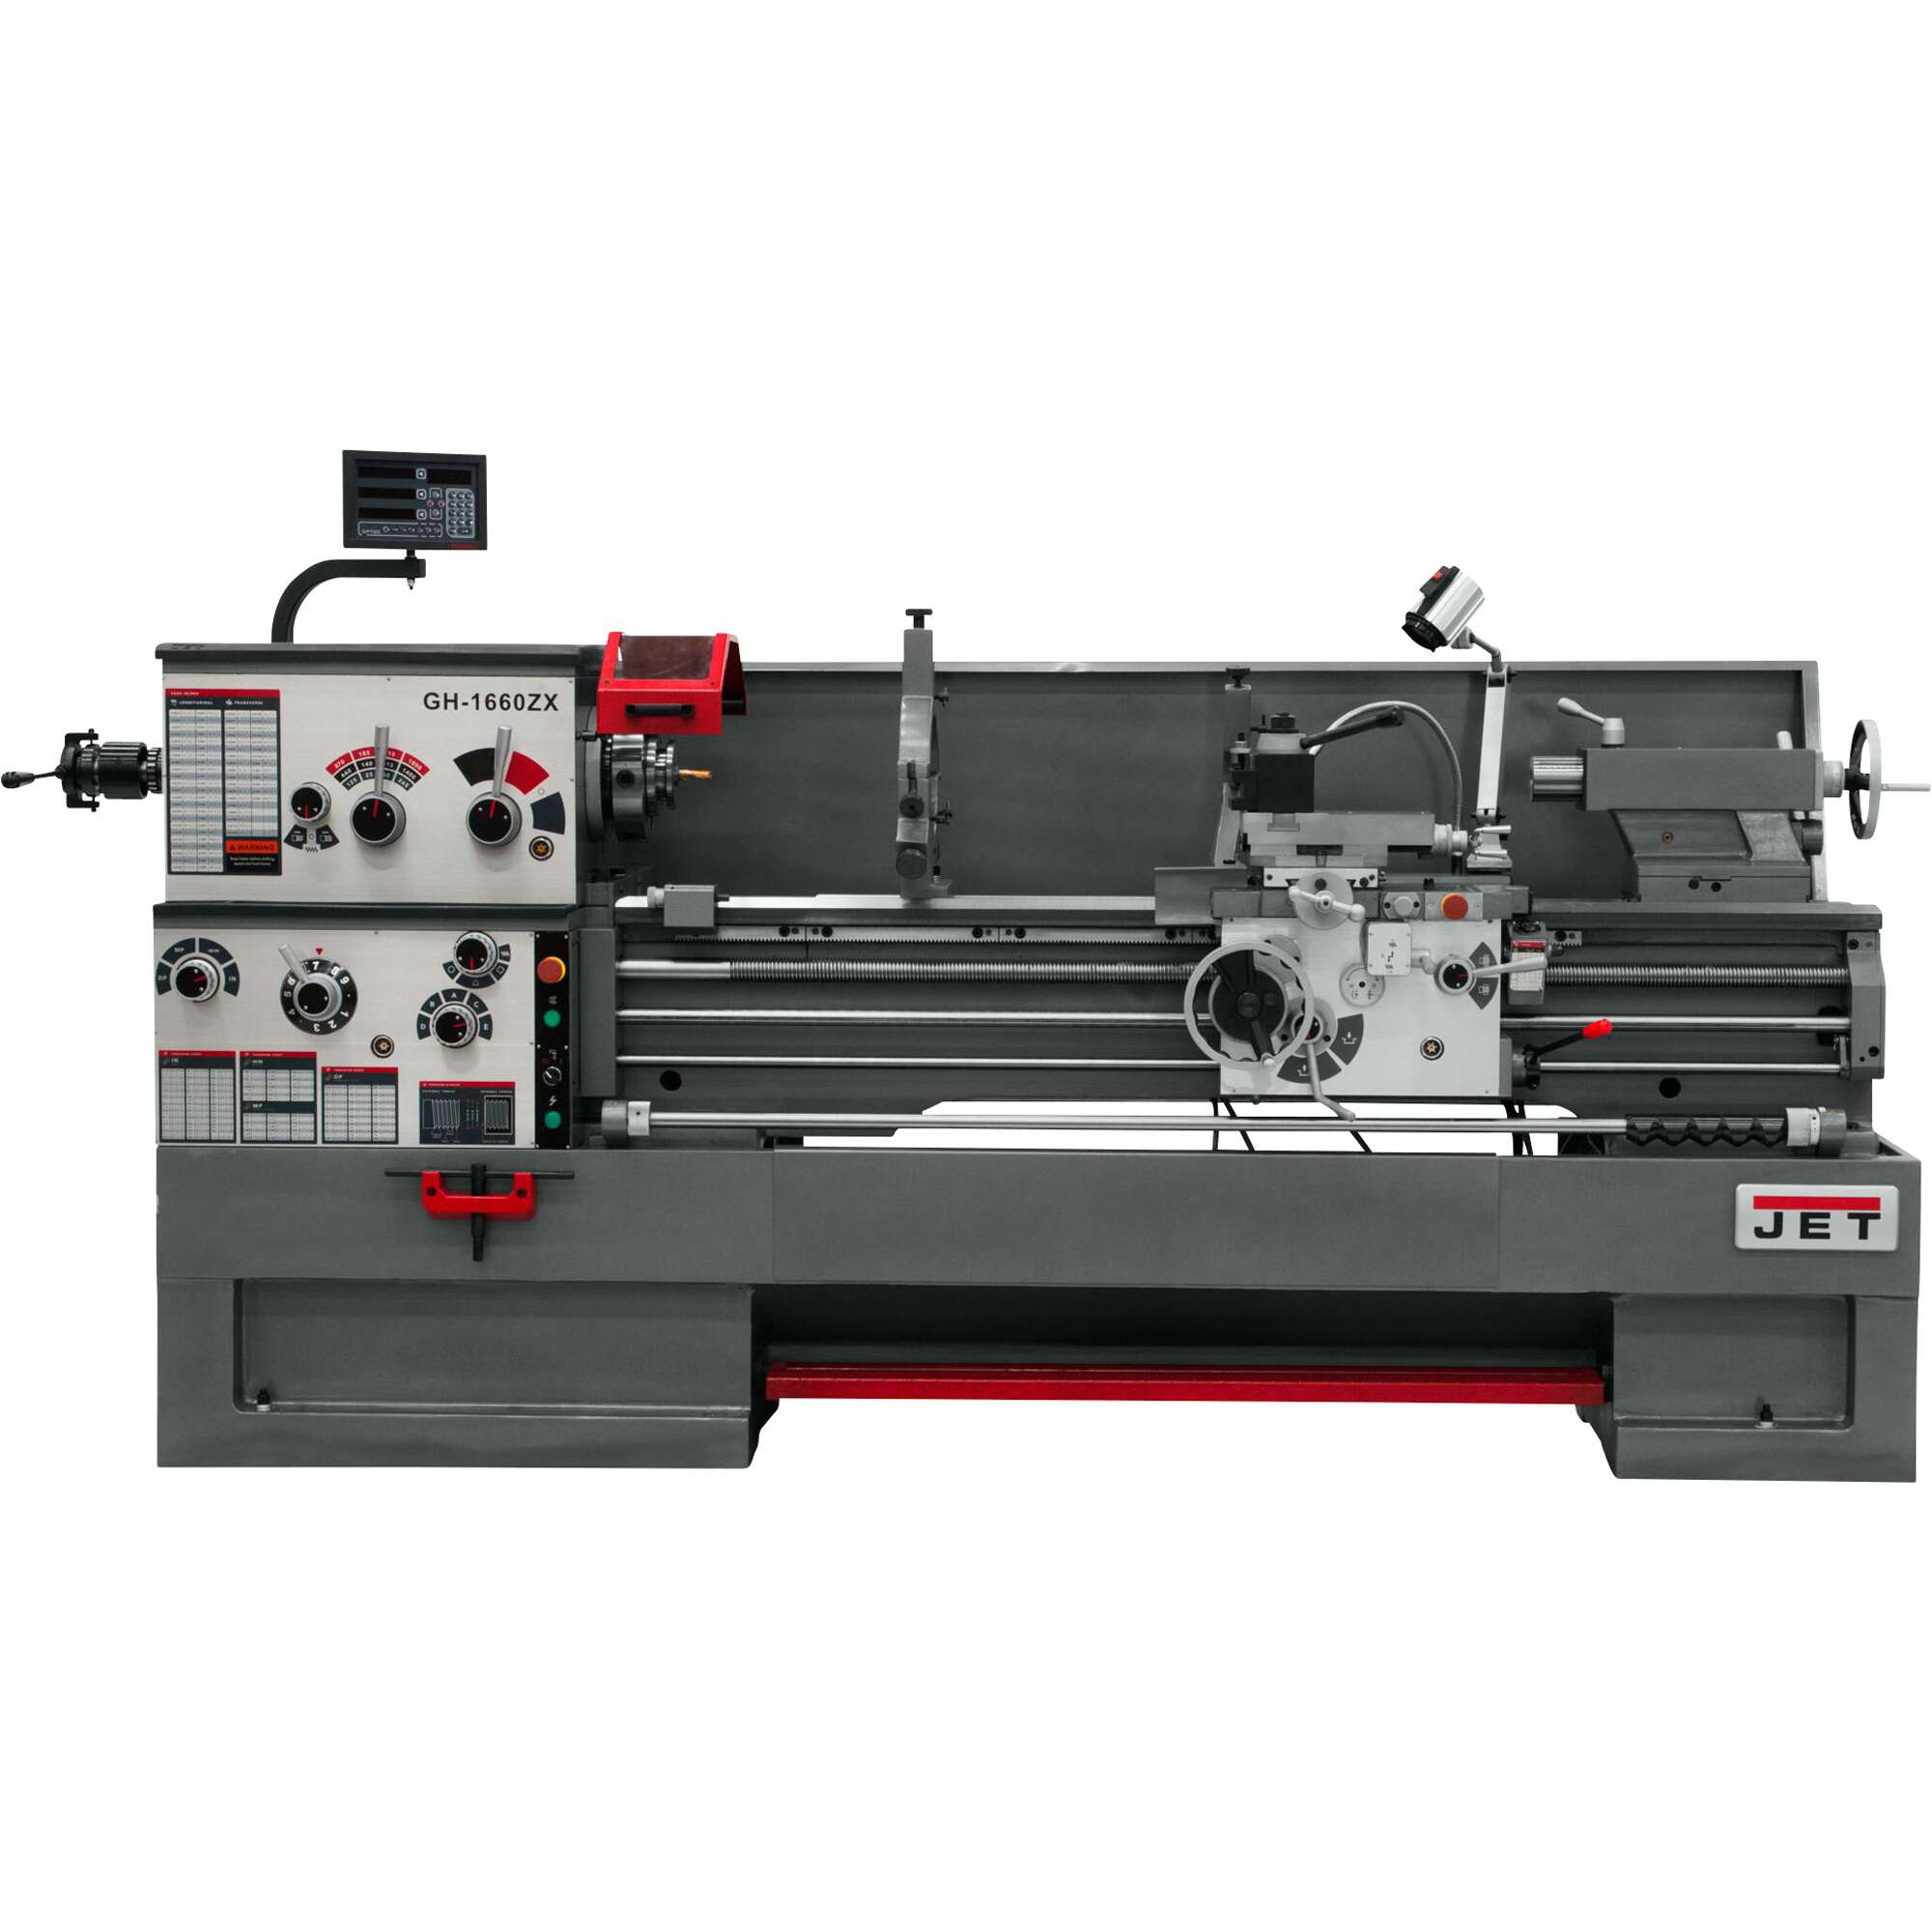 JET ZX-Series Large Spindle Bore Lathe with Acu Rite 203 DRO with Taper Attachment and Collet Closer 16in x 60in